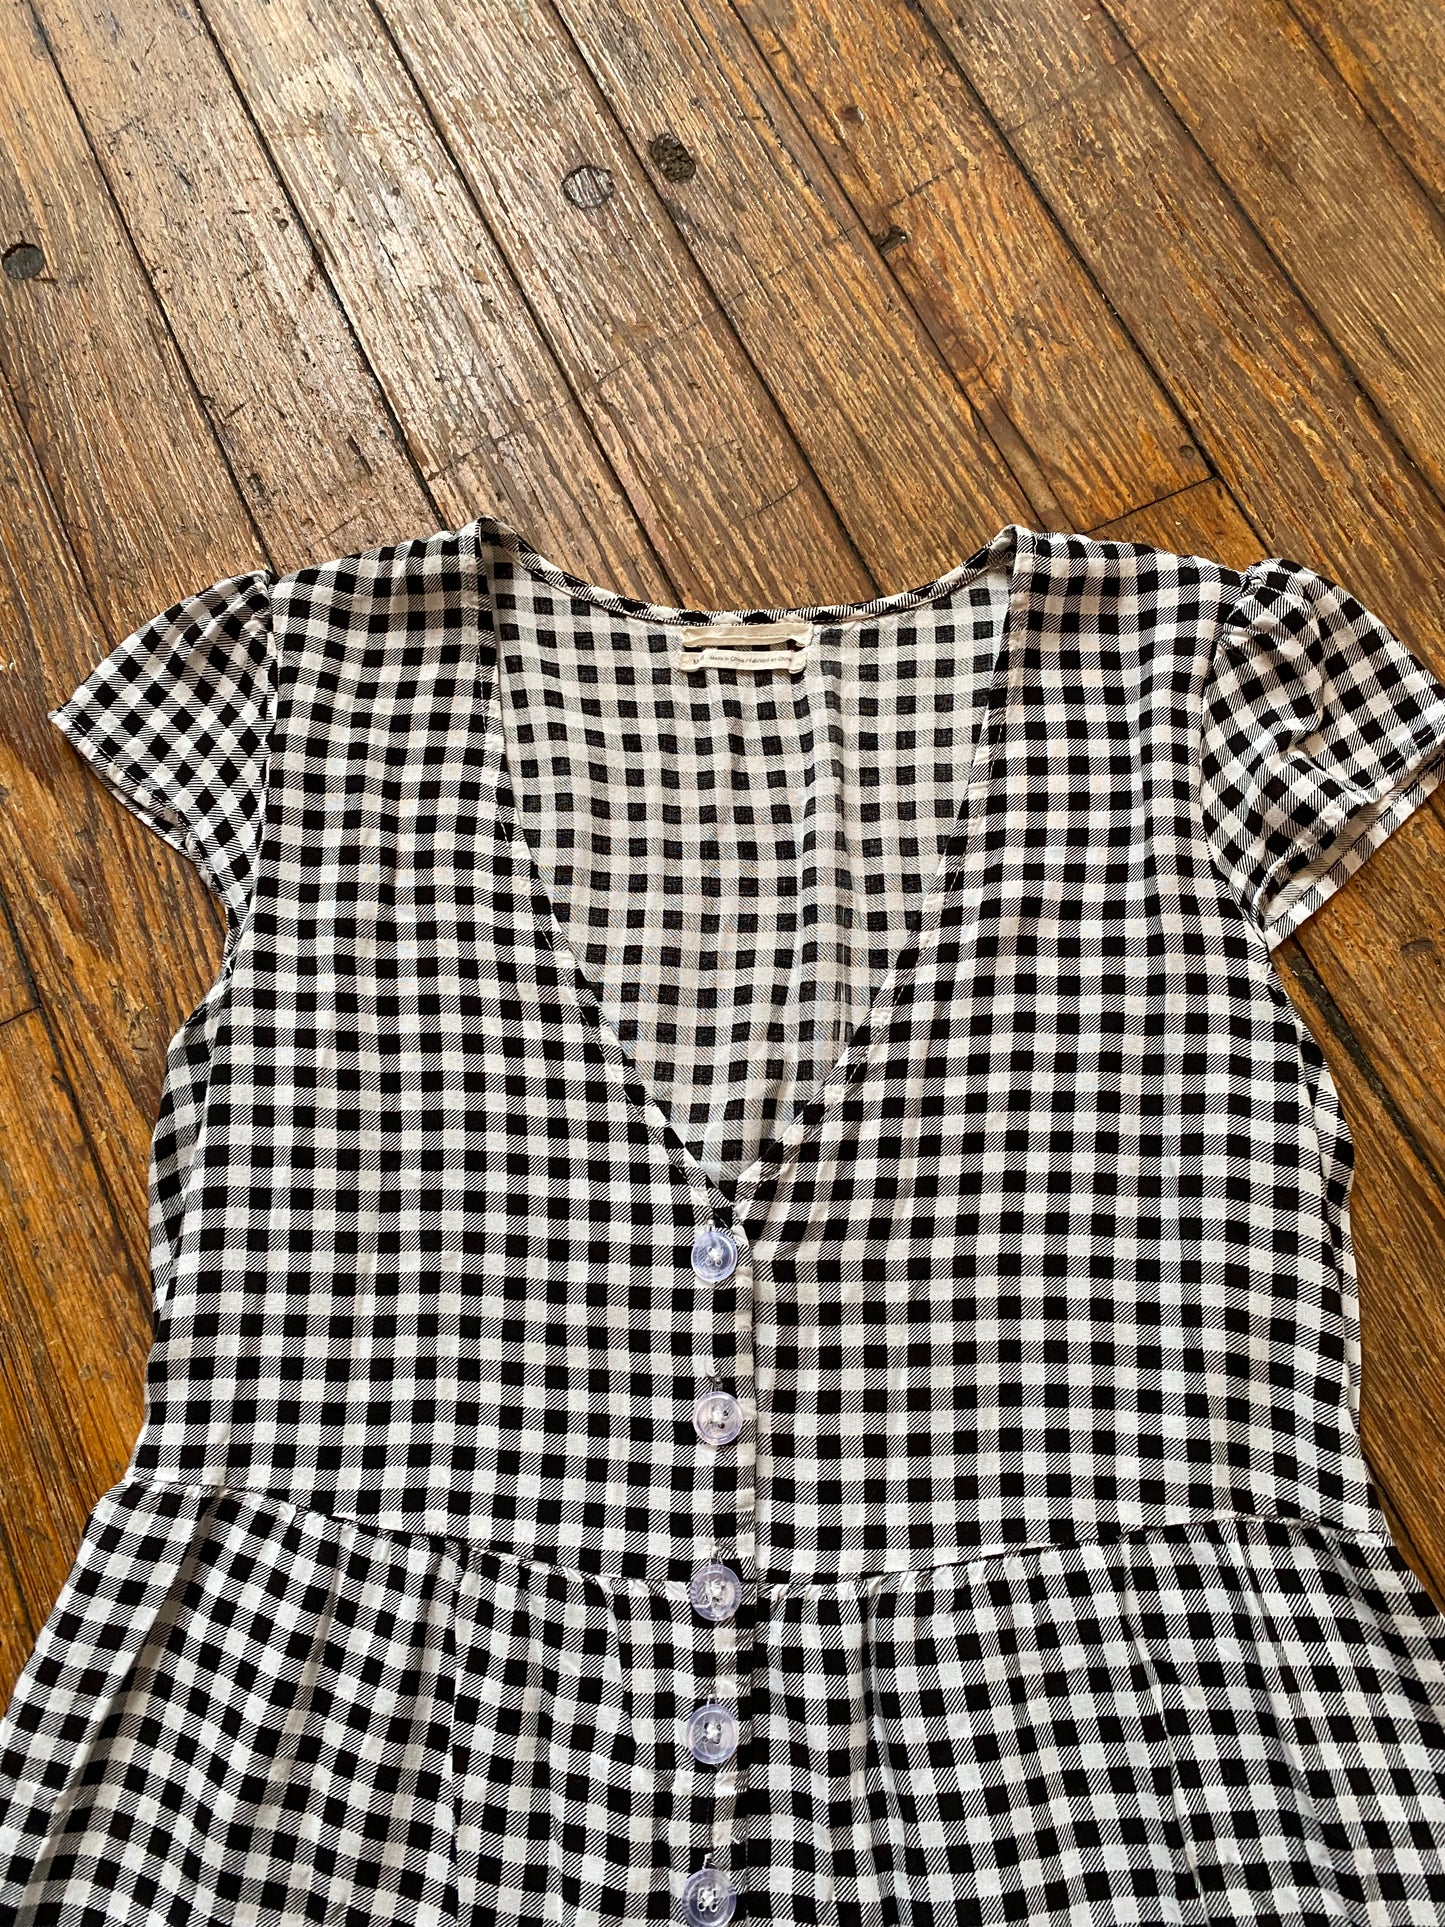 Urban Outfitters Black and White Checkered Romper